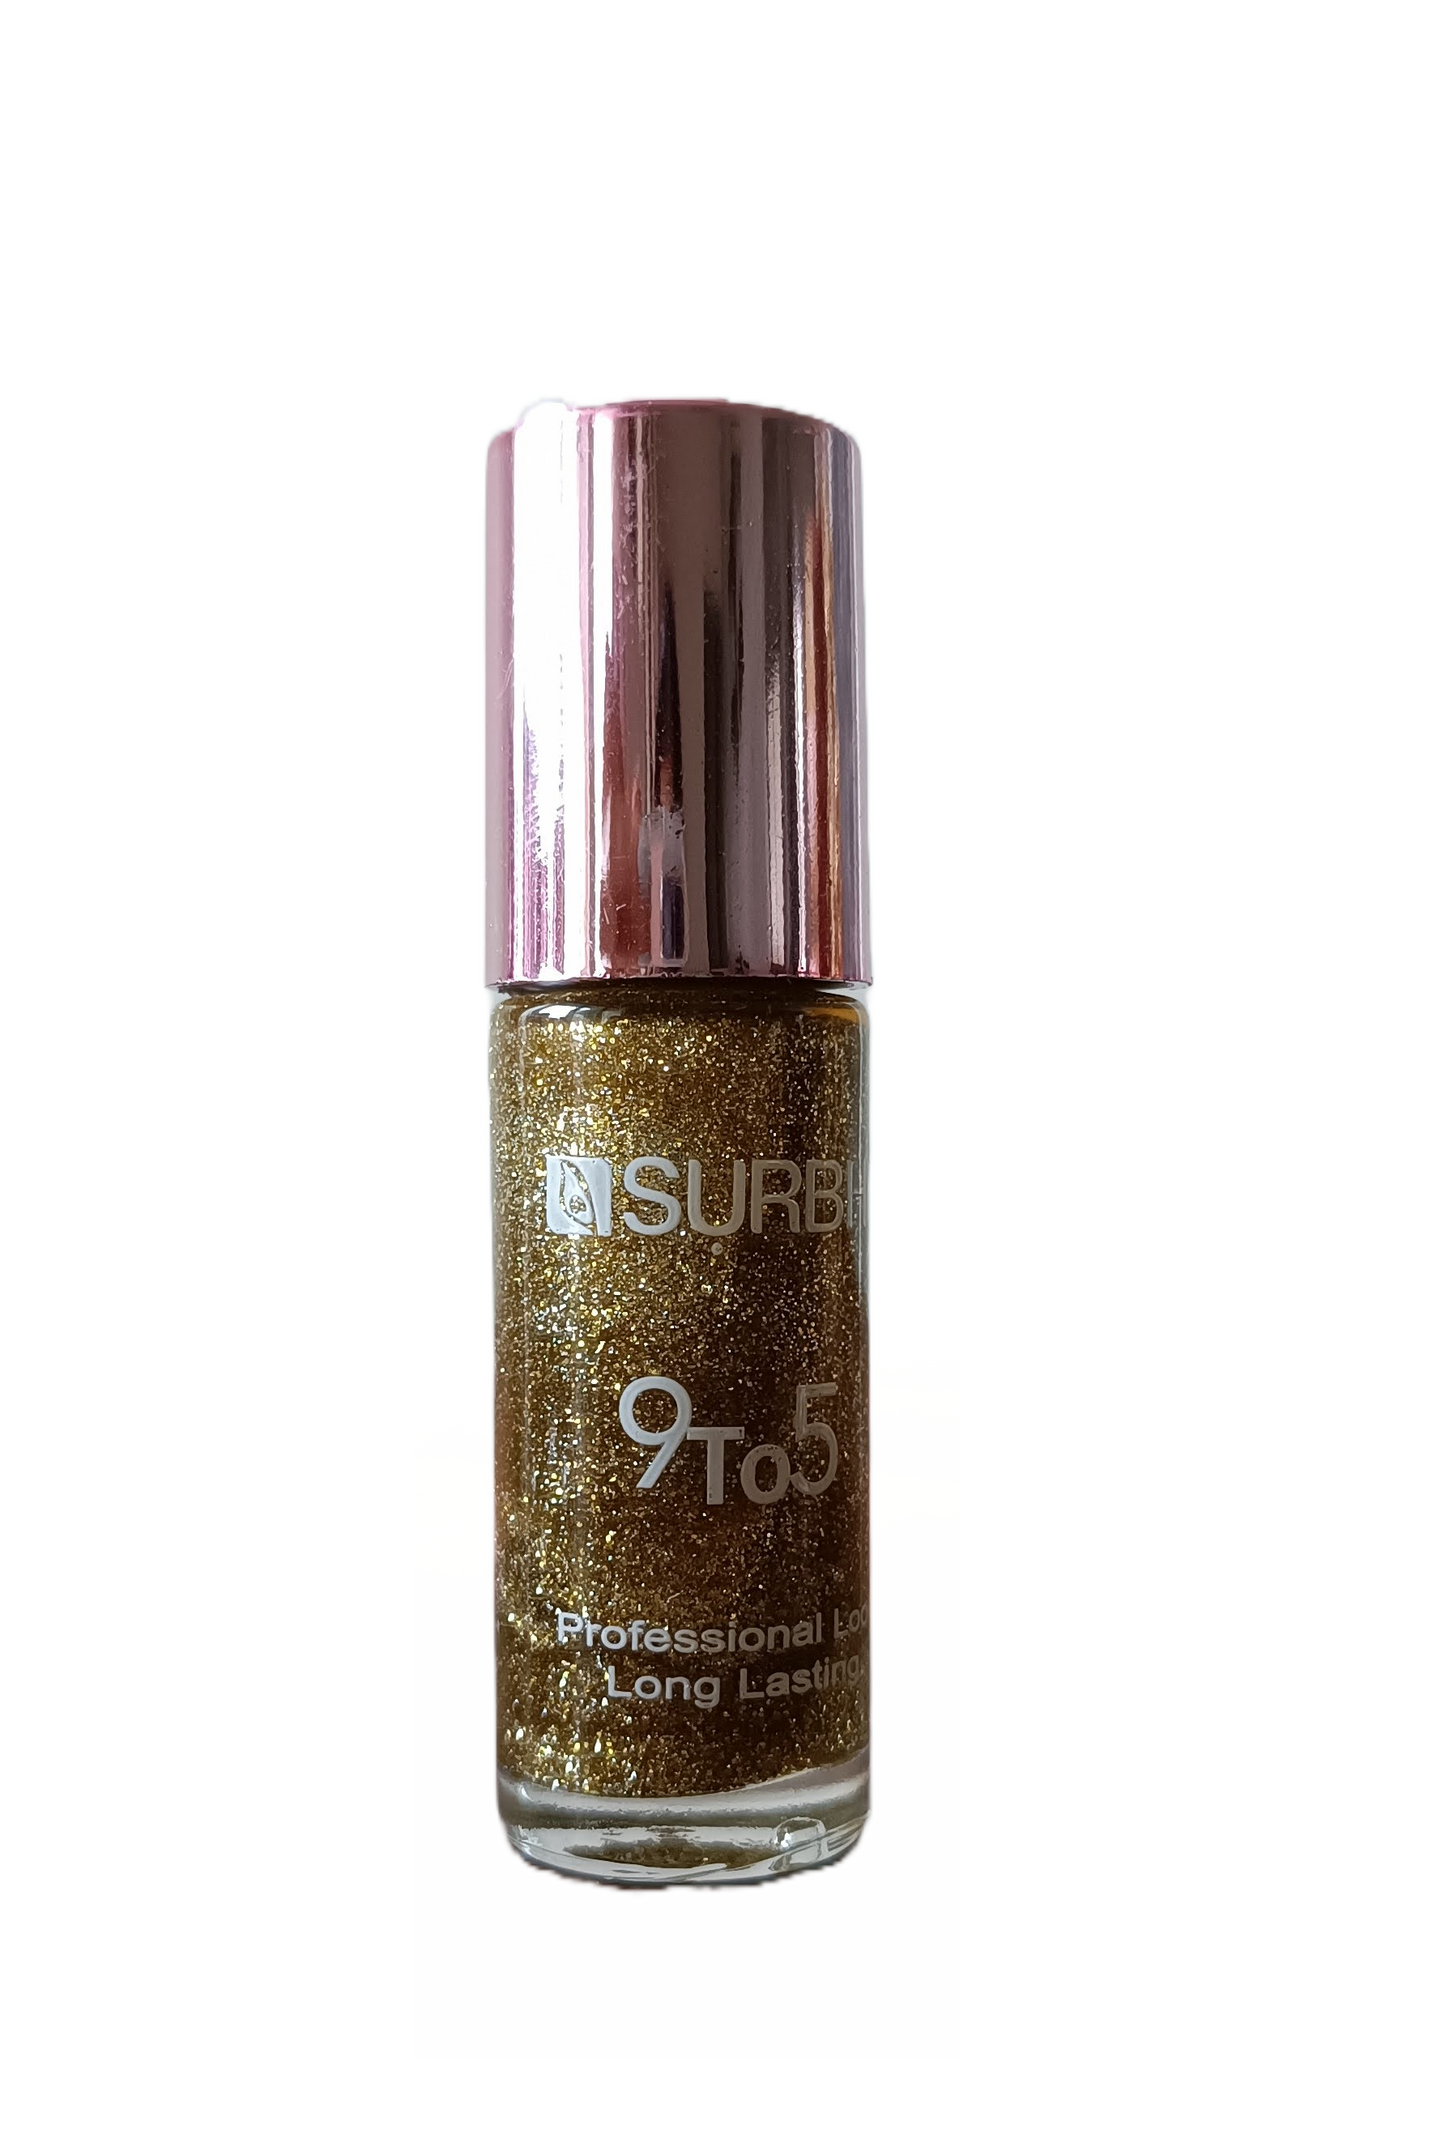 9 to 5 Professional Look Long Lasting Nail Paint - Shimmer Yellow - 8 ml